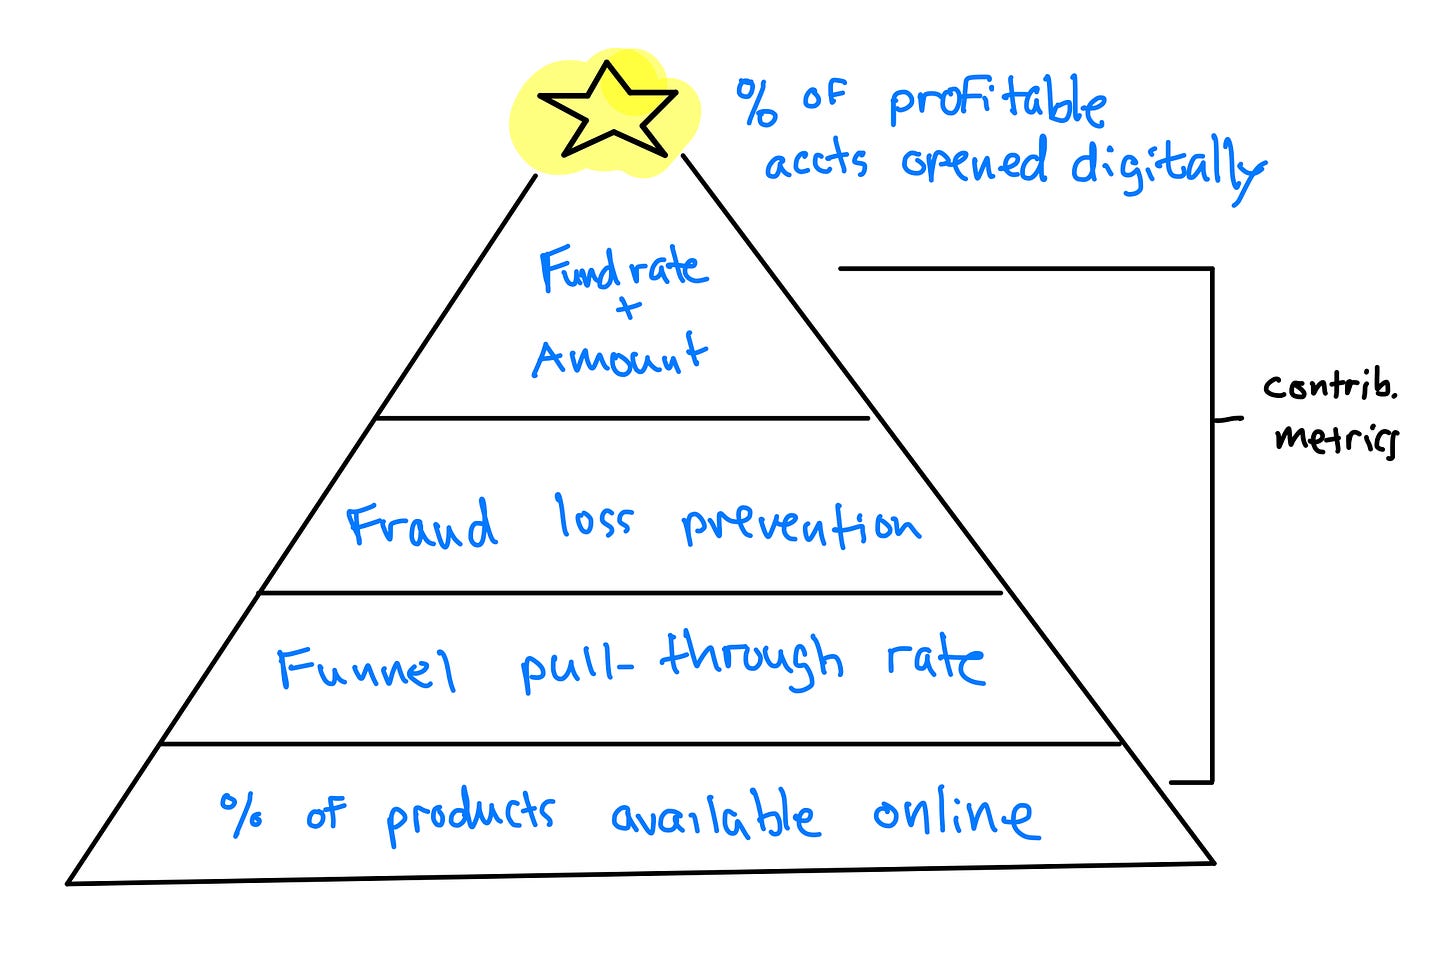 Sketch of a product northstar metric and contributing metrics